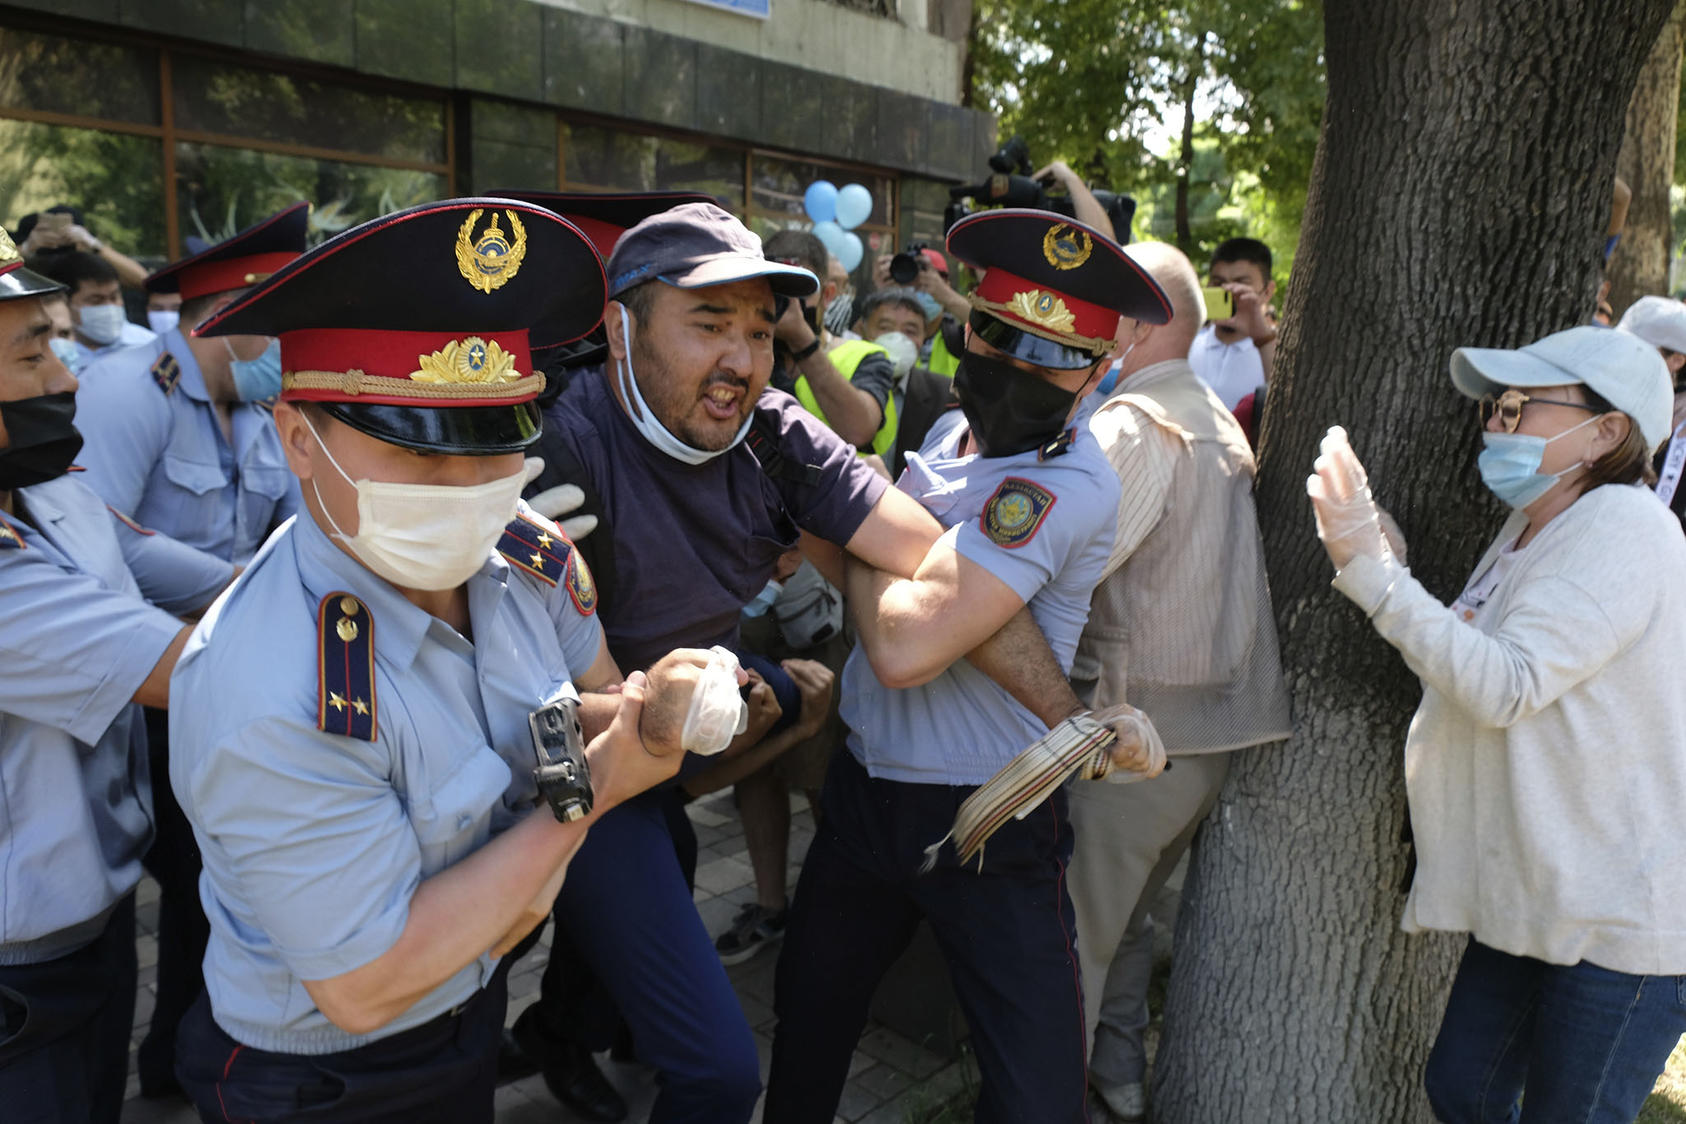 Police wearing face masks to protect against coronavirus detain a protester during an unsanctioned protest in Almaty, Kazakhstan, on June 6, 2020. (Vladimir Tretyakov/AP)